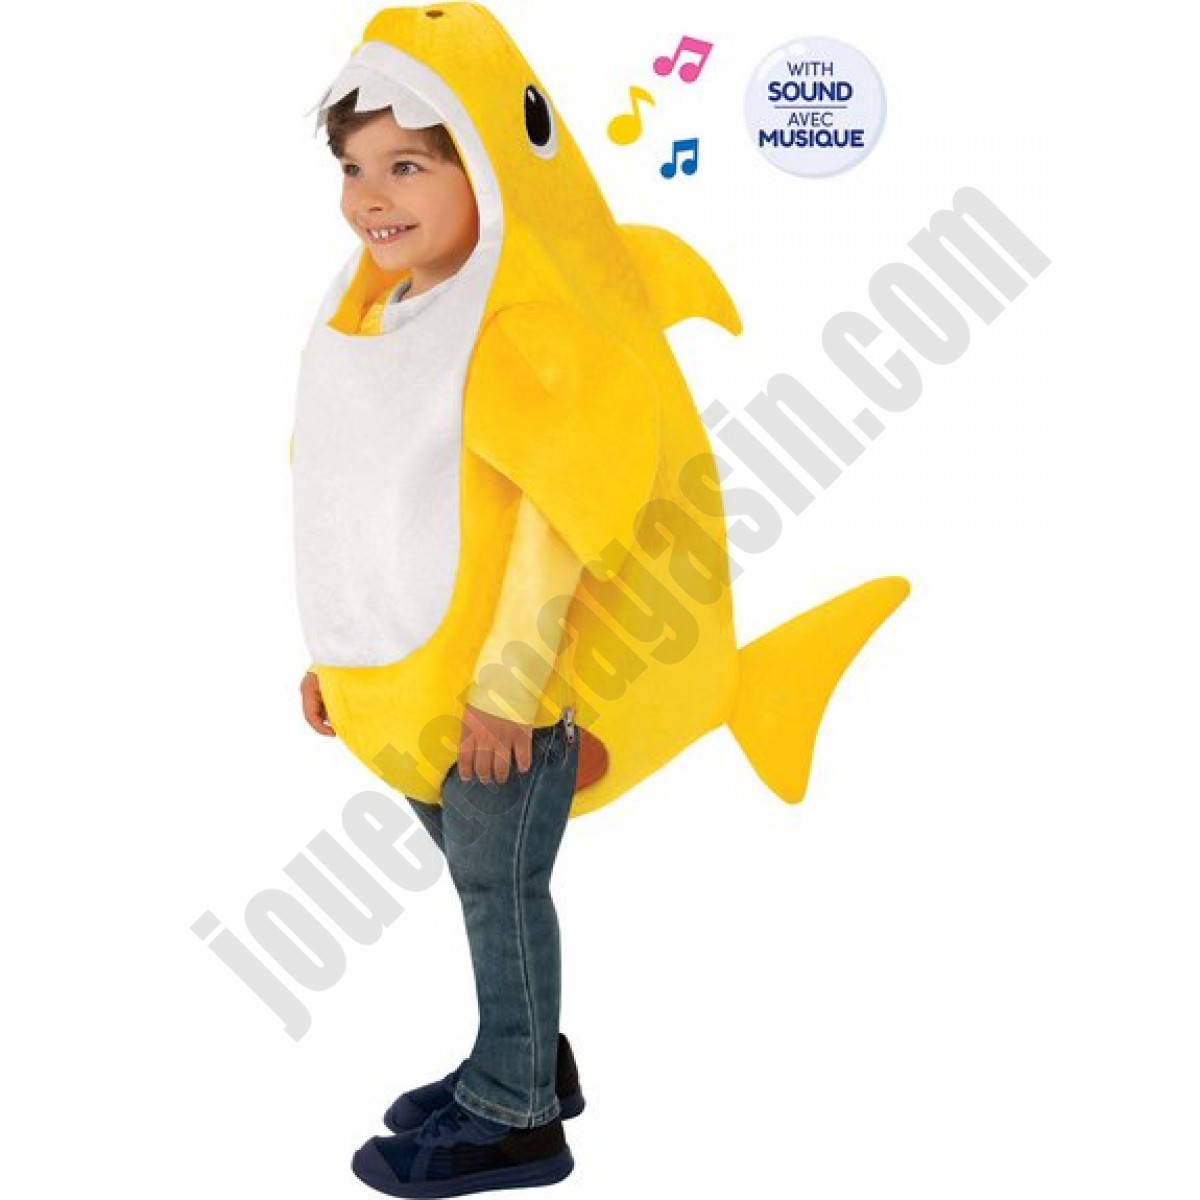 Déguisement musical Baby Shark Taille 2-3 ans - déstockage - Déguisement musical Baby Shark Taille 2-3 ans - déstockage